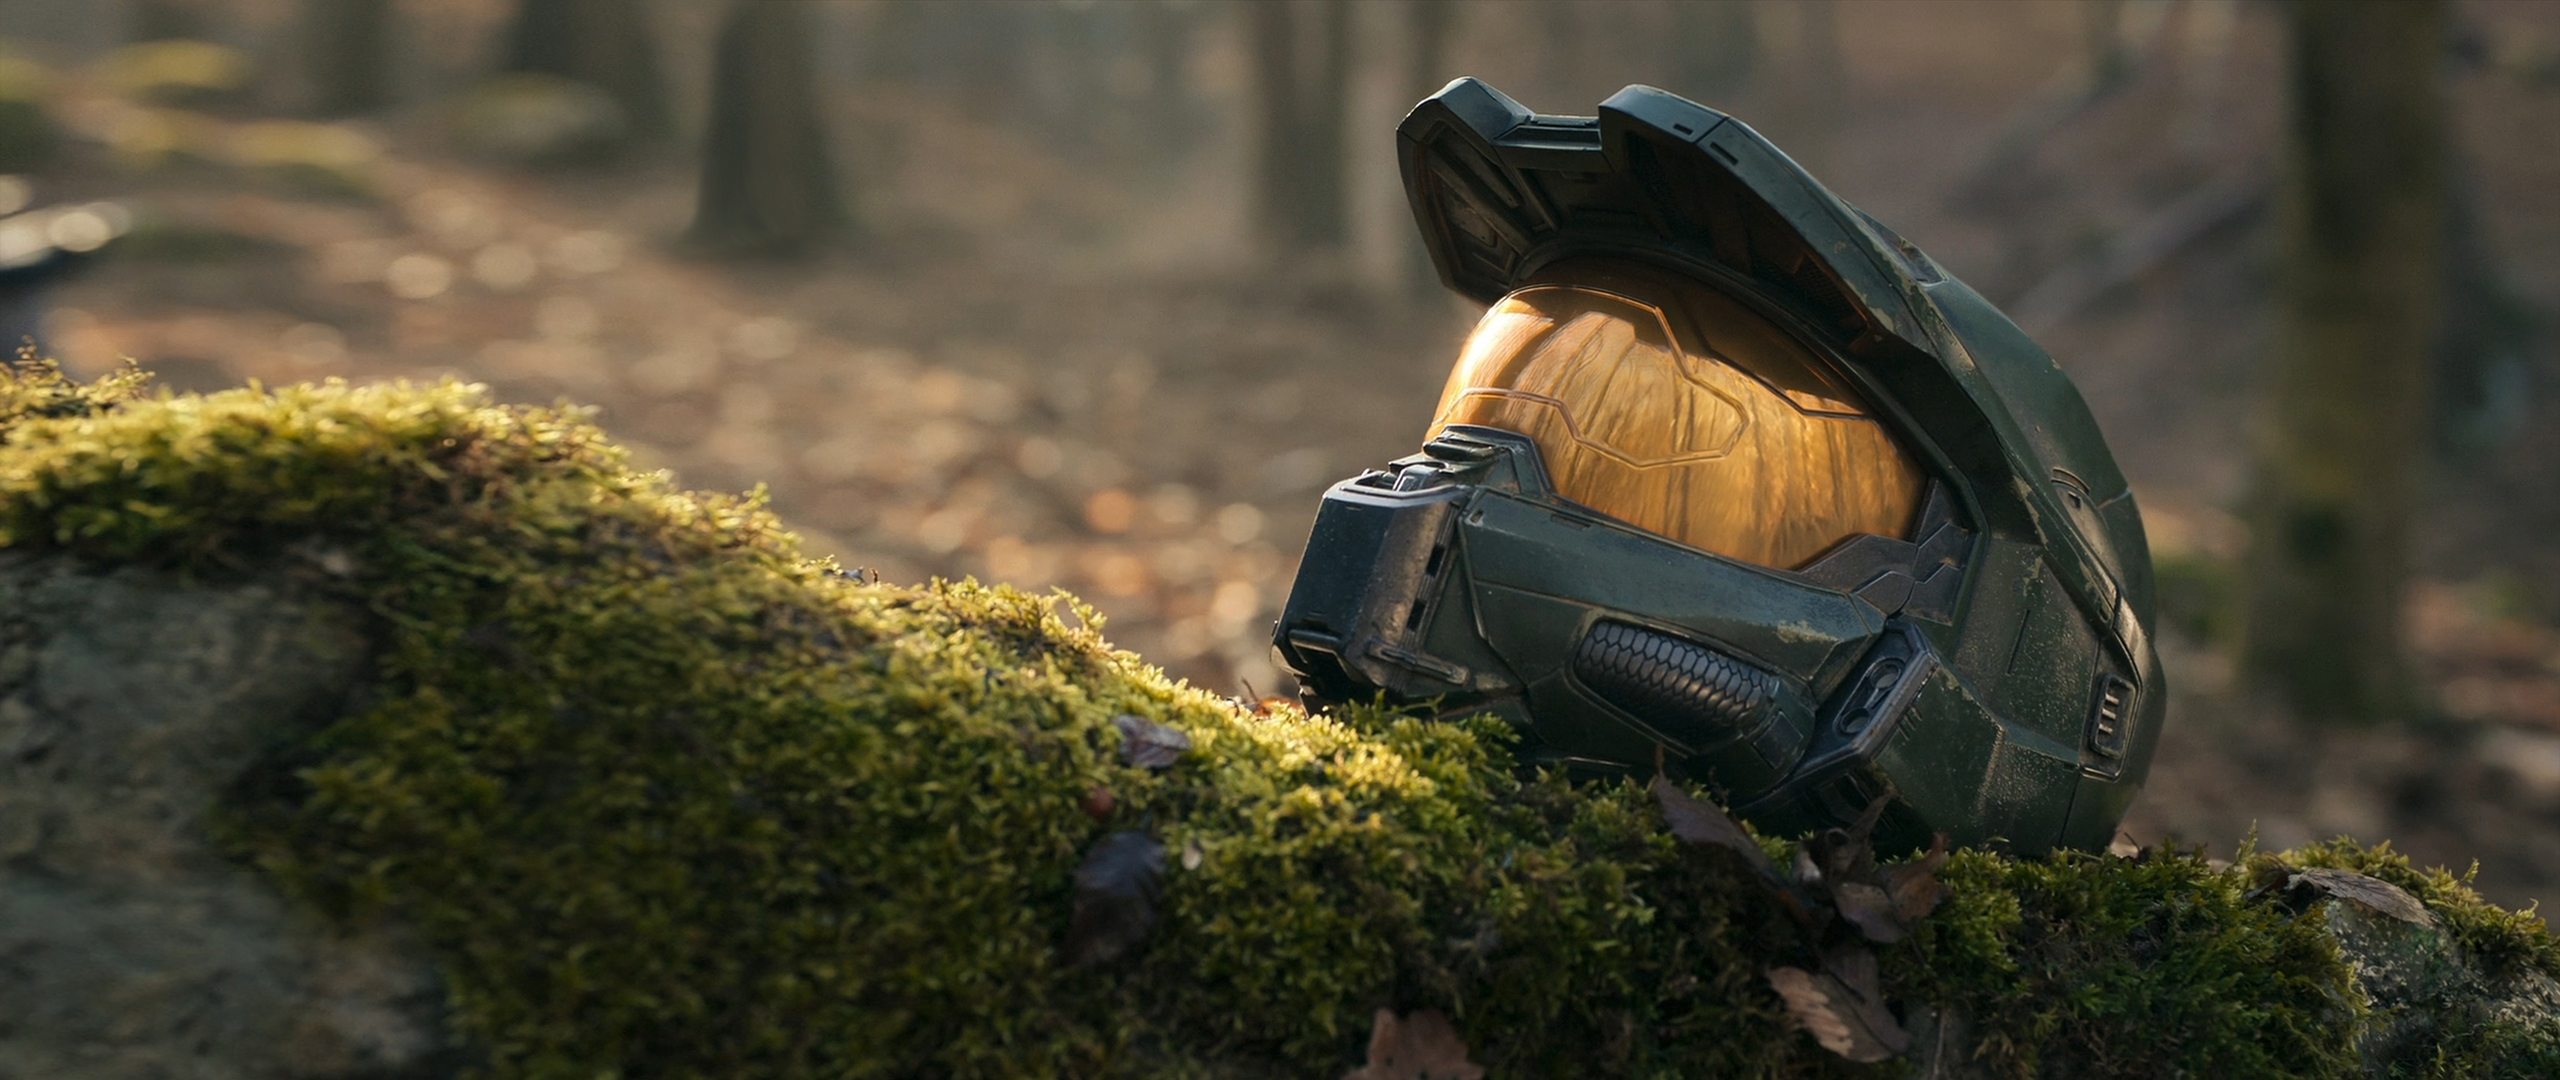 Halo TV Series Master Chief Halo Helmet Forest Ultrawide 2560x1080